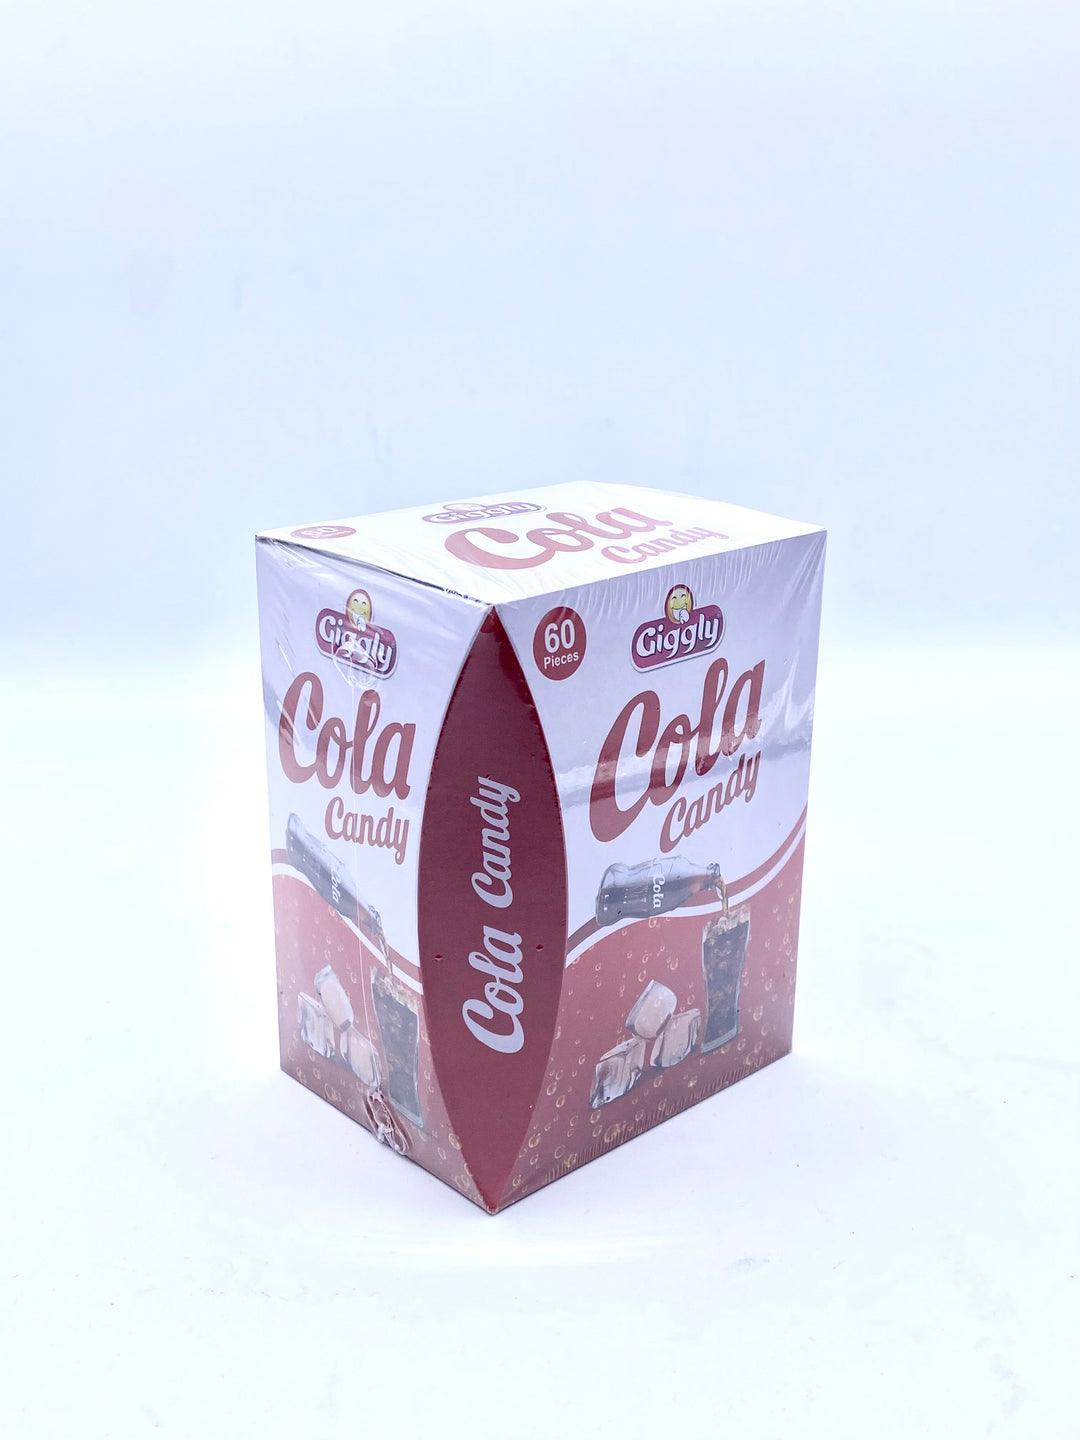 Giggly Cola Candy Box 50gx60